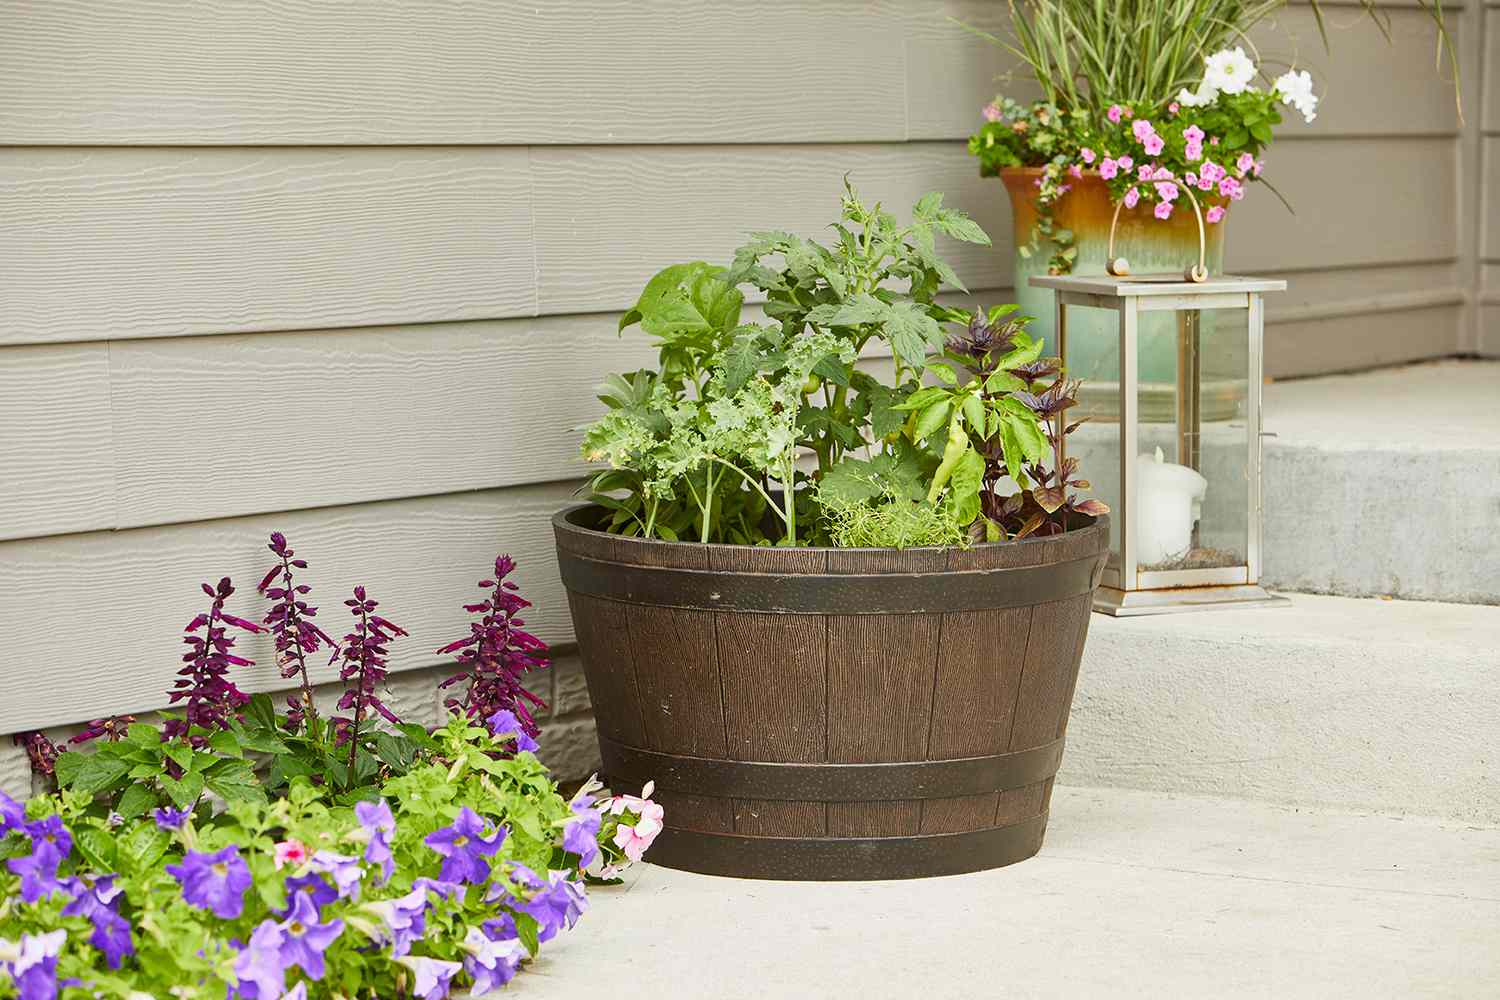 growing vegetables in containers | better homes & gardens